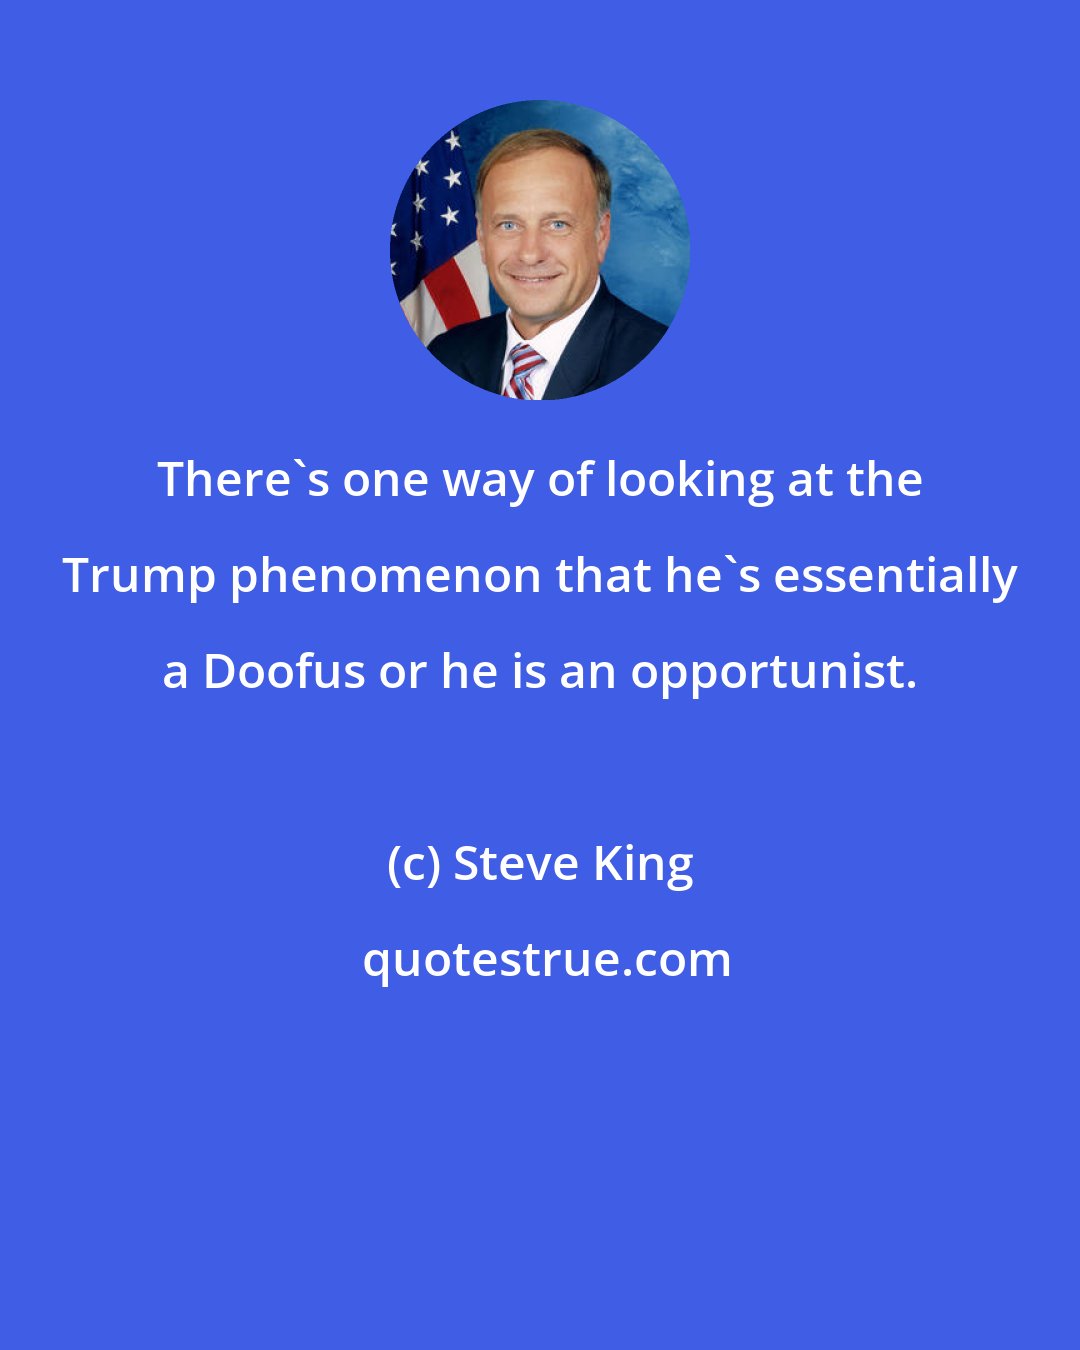 Steve King: There`s one way of looking at the Trump phenomenon that he`s essentially a Doofus or he is an opportunist.